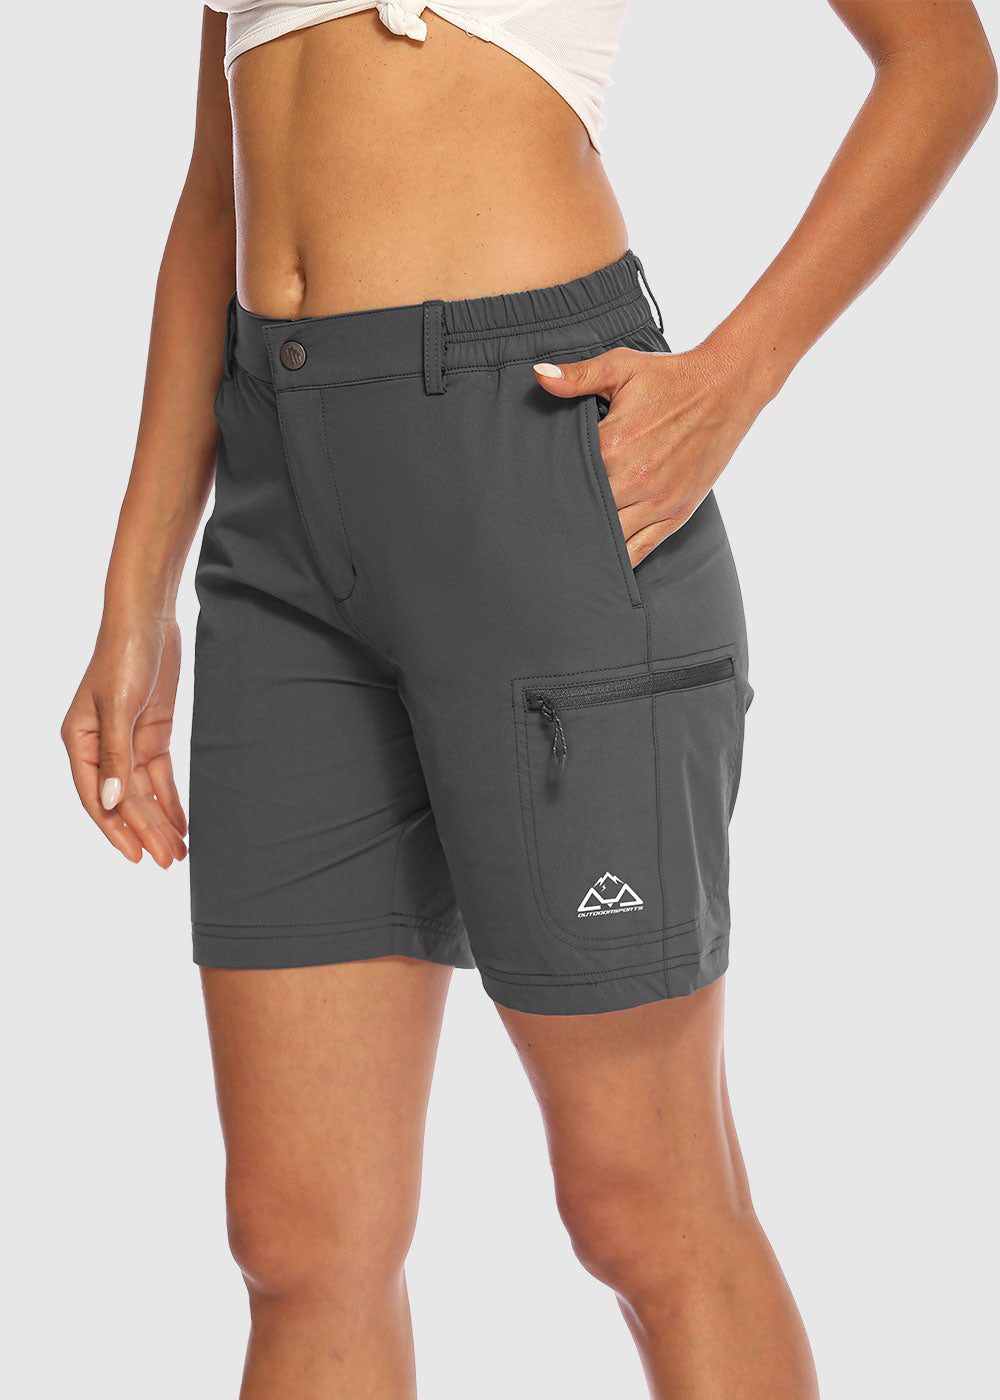 WindRiver Women's Performance Quick Dry Shorts with Zippered Cargo